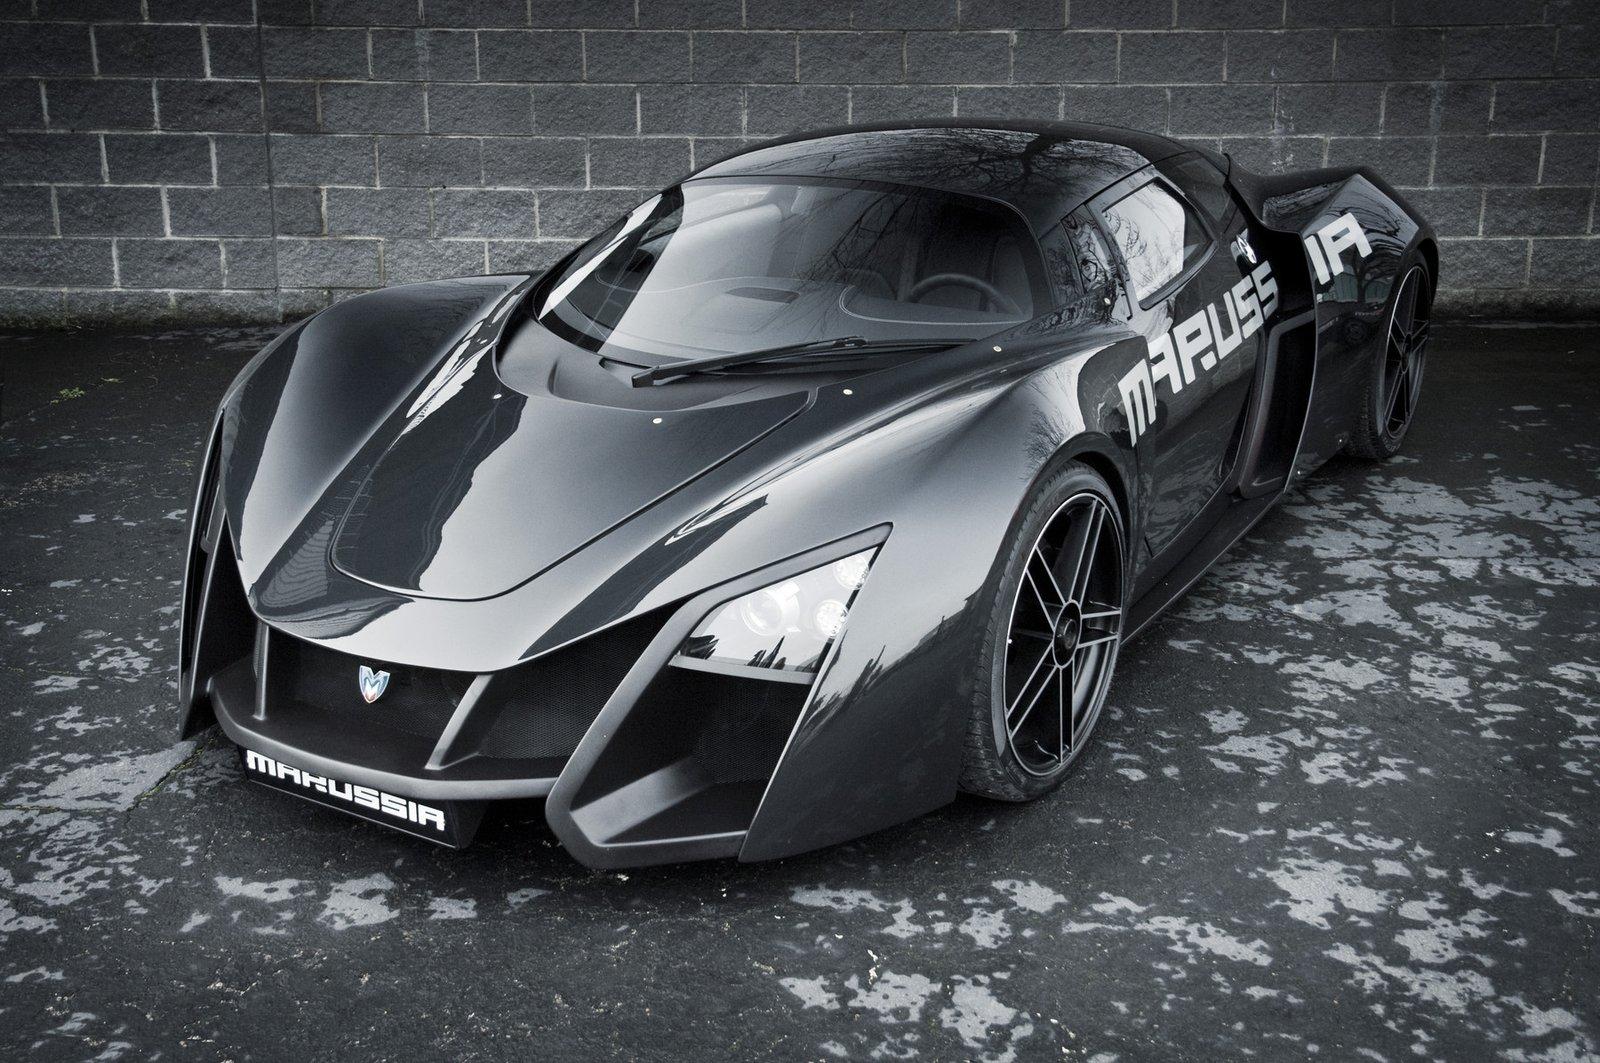 Exotic Cars Image Marussia B2 HD Wallpaper And Background